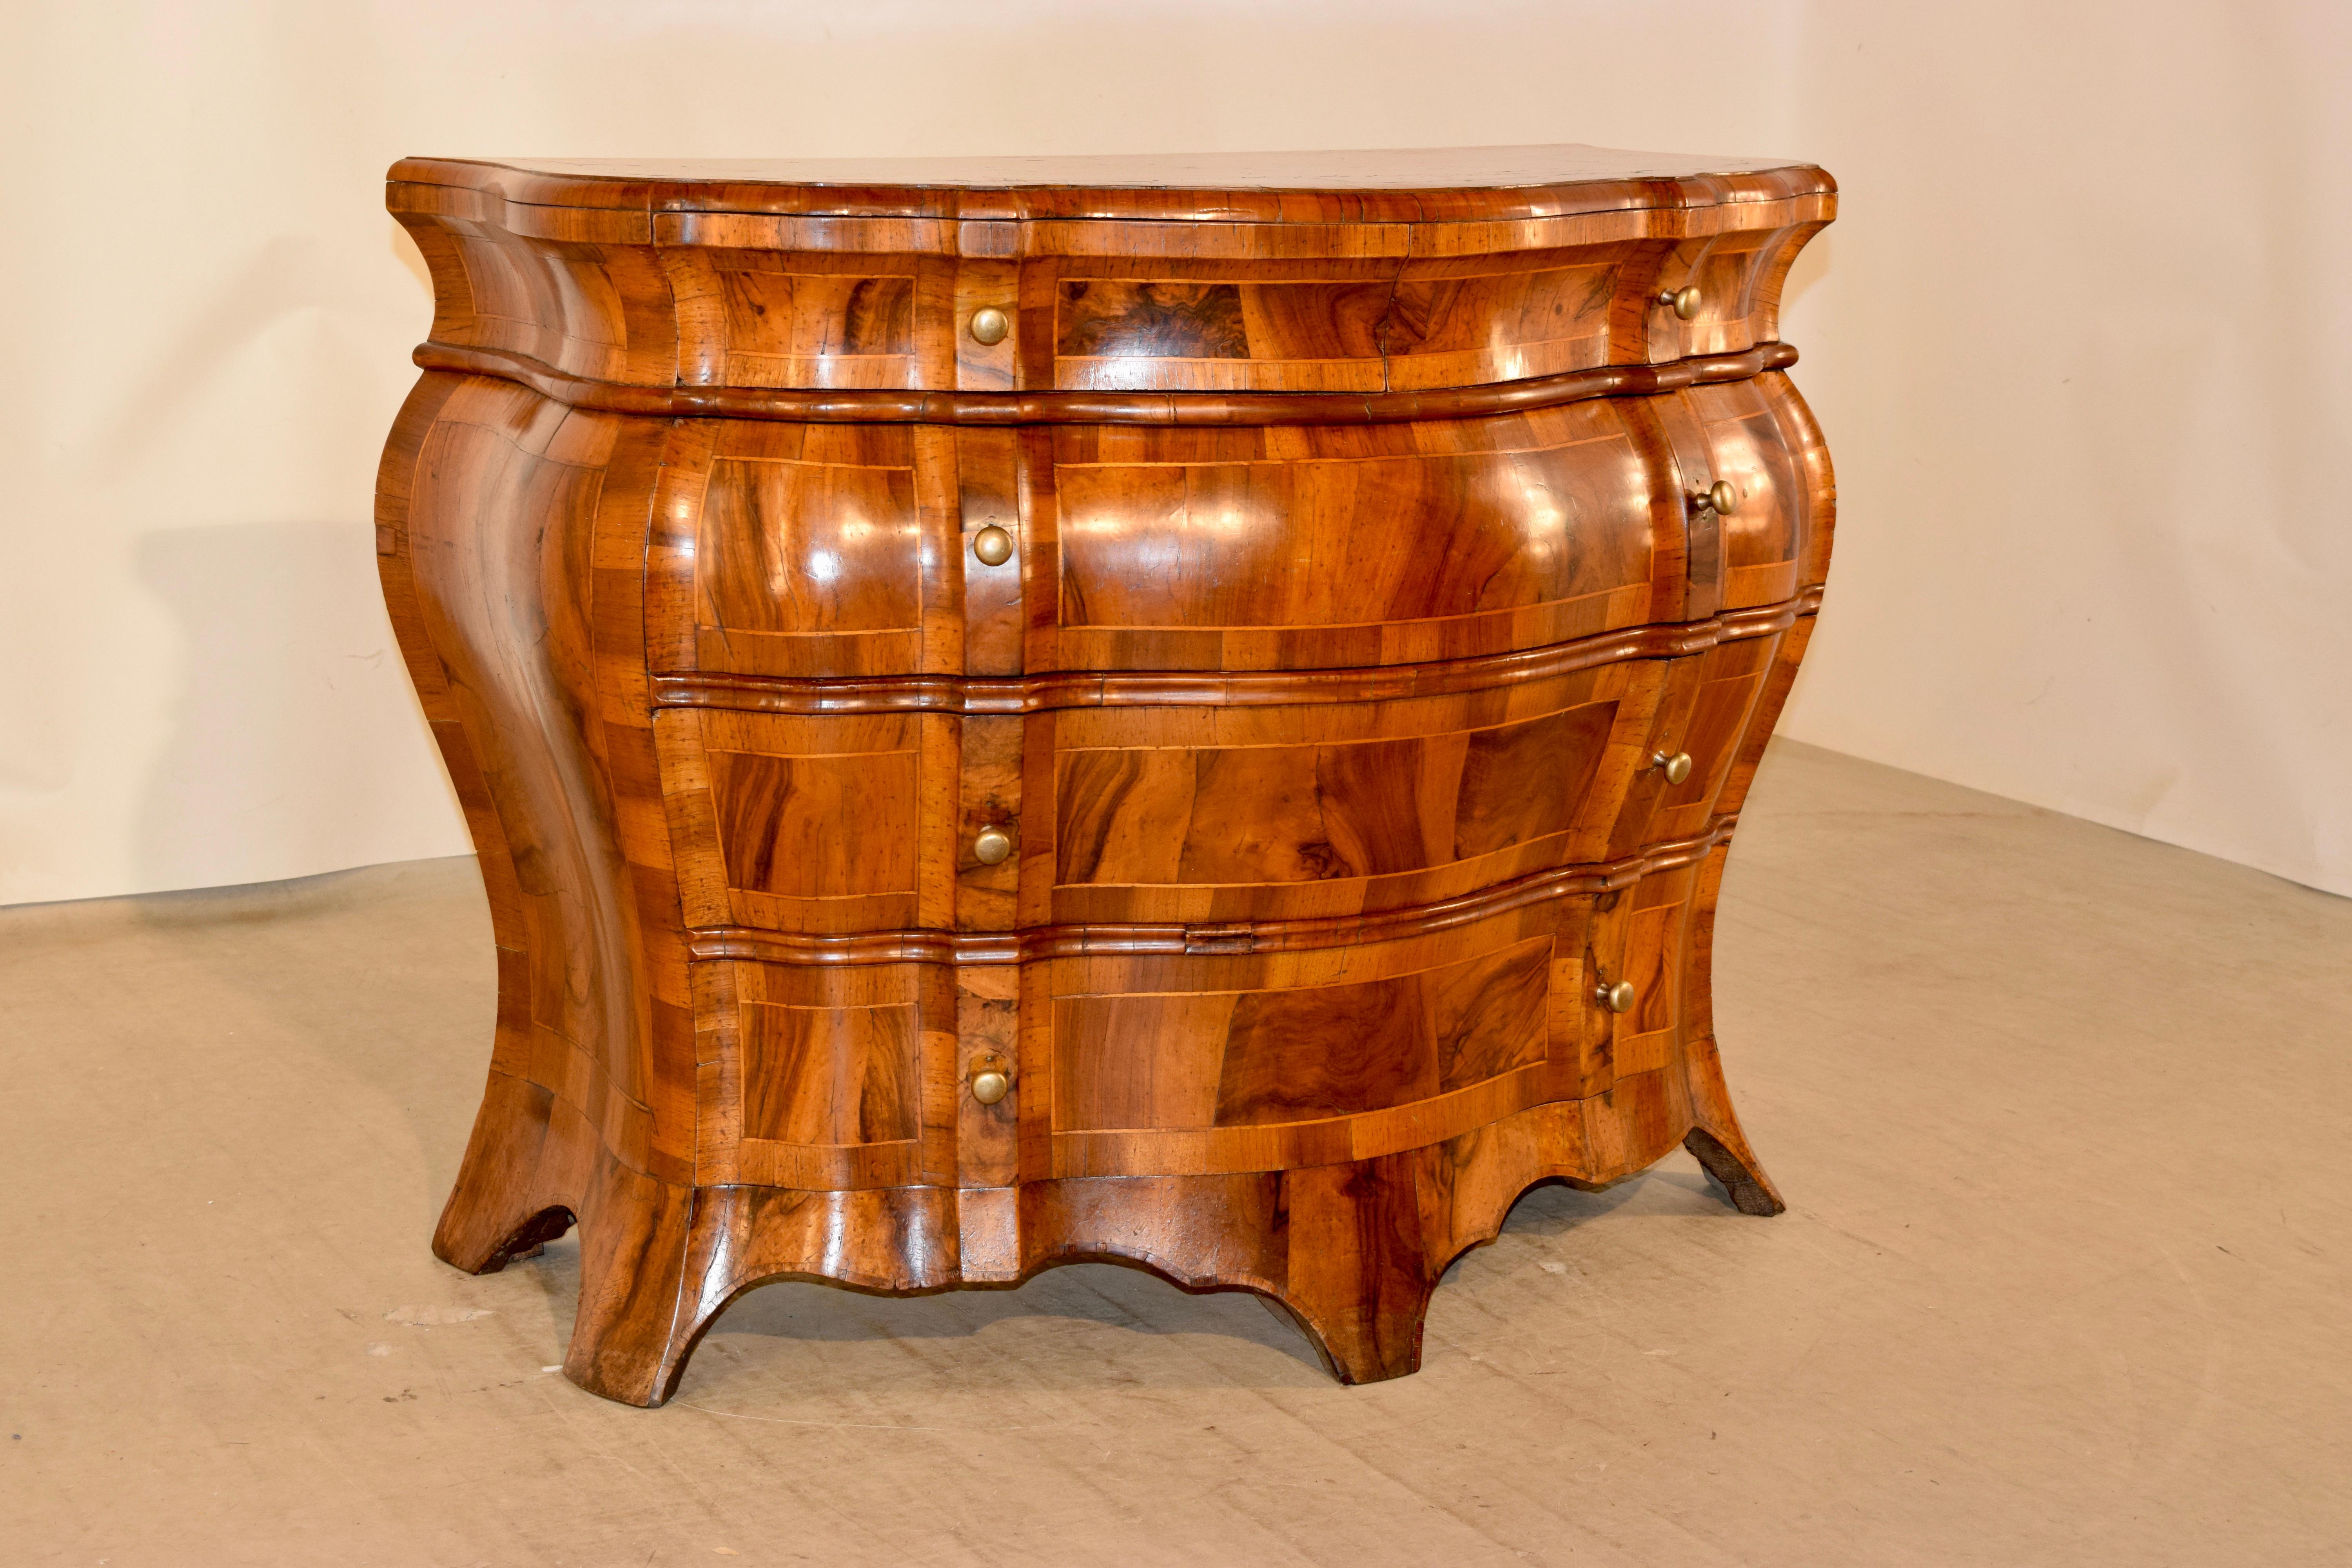 19th century inlaid bombe commode from Italy made from olive wood. The top is banded and has book-matched veneers. The case has two over three drawers with repeating banded inlays and banded inlaid side panels. The case is supported on shaped